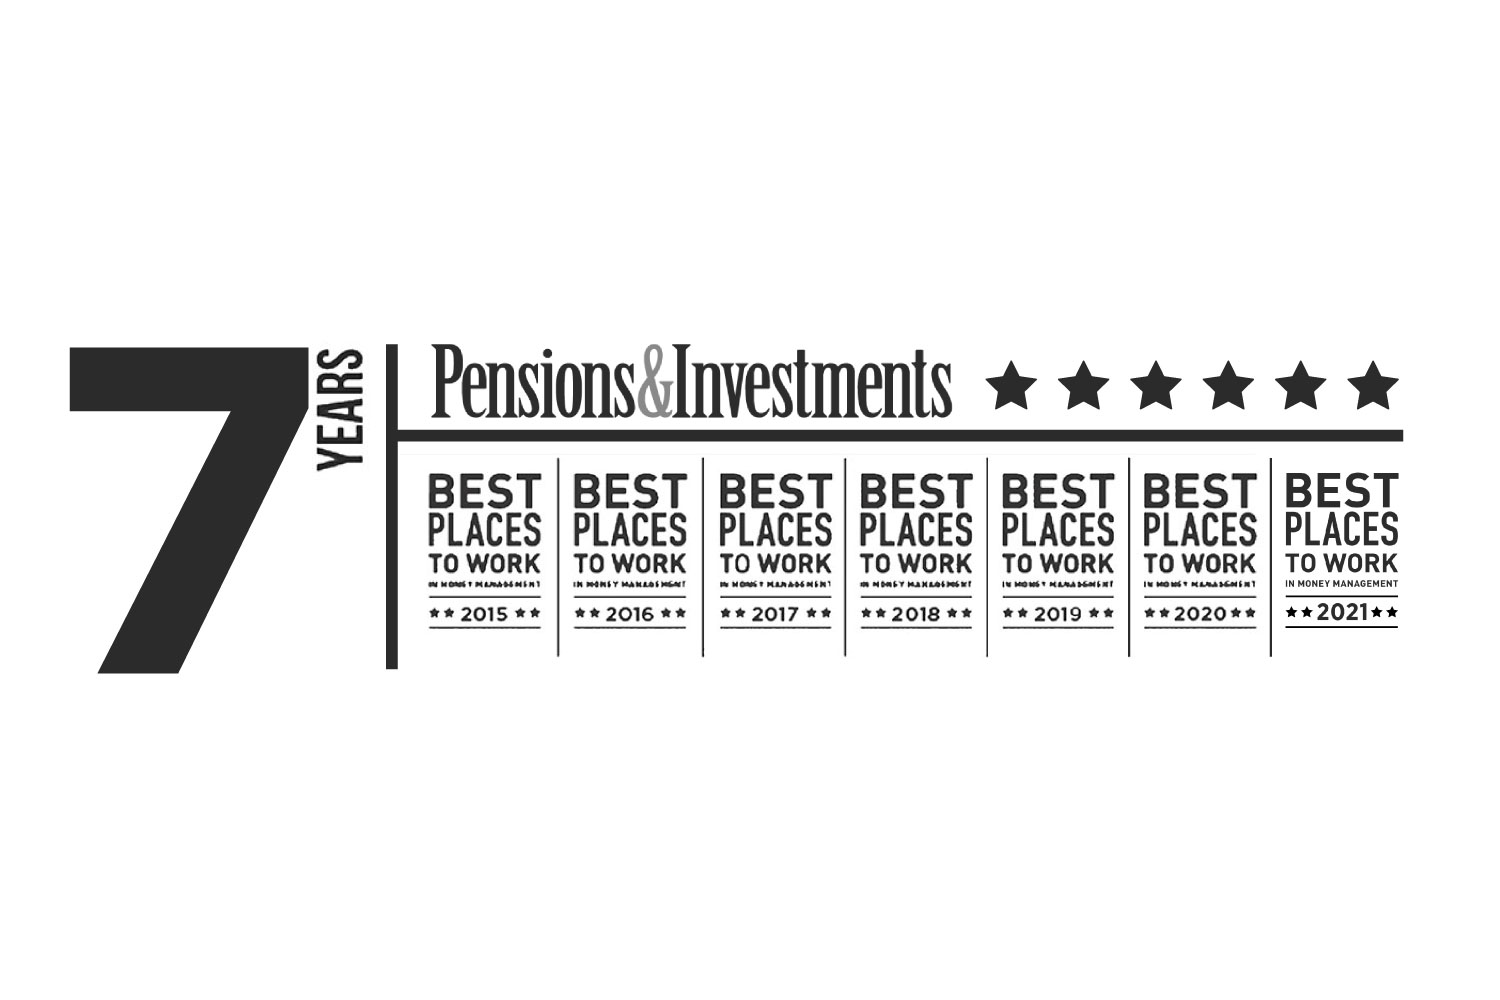 Pensions & Investments 7 Years | Cardinal Investment Advisors